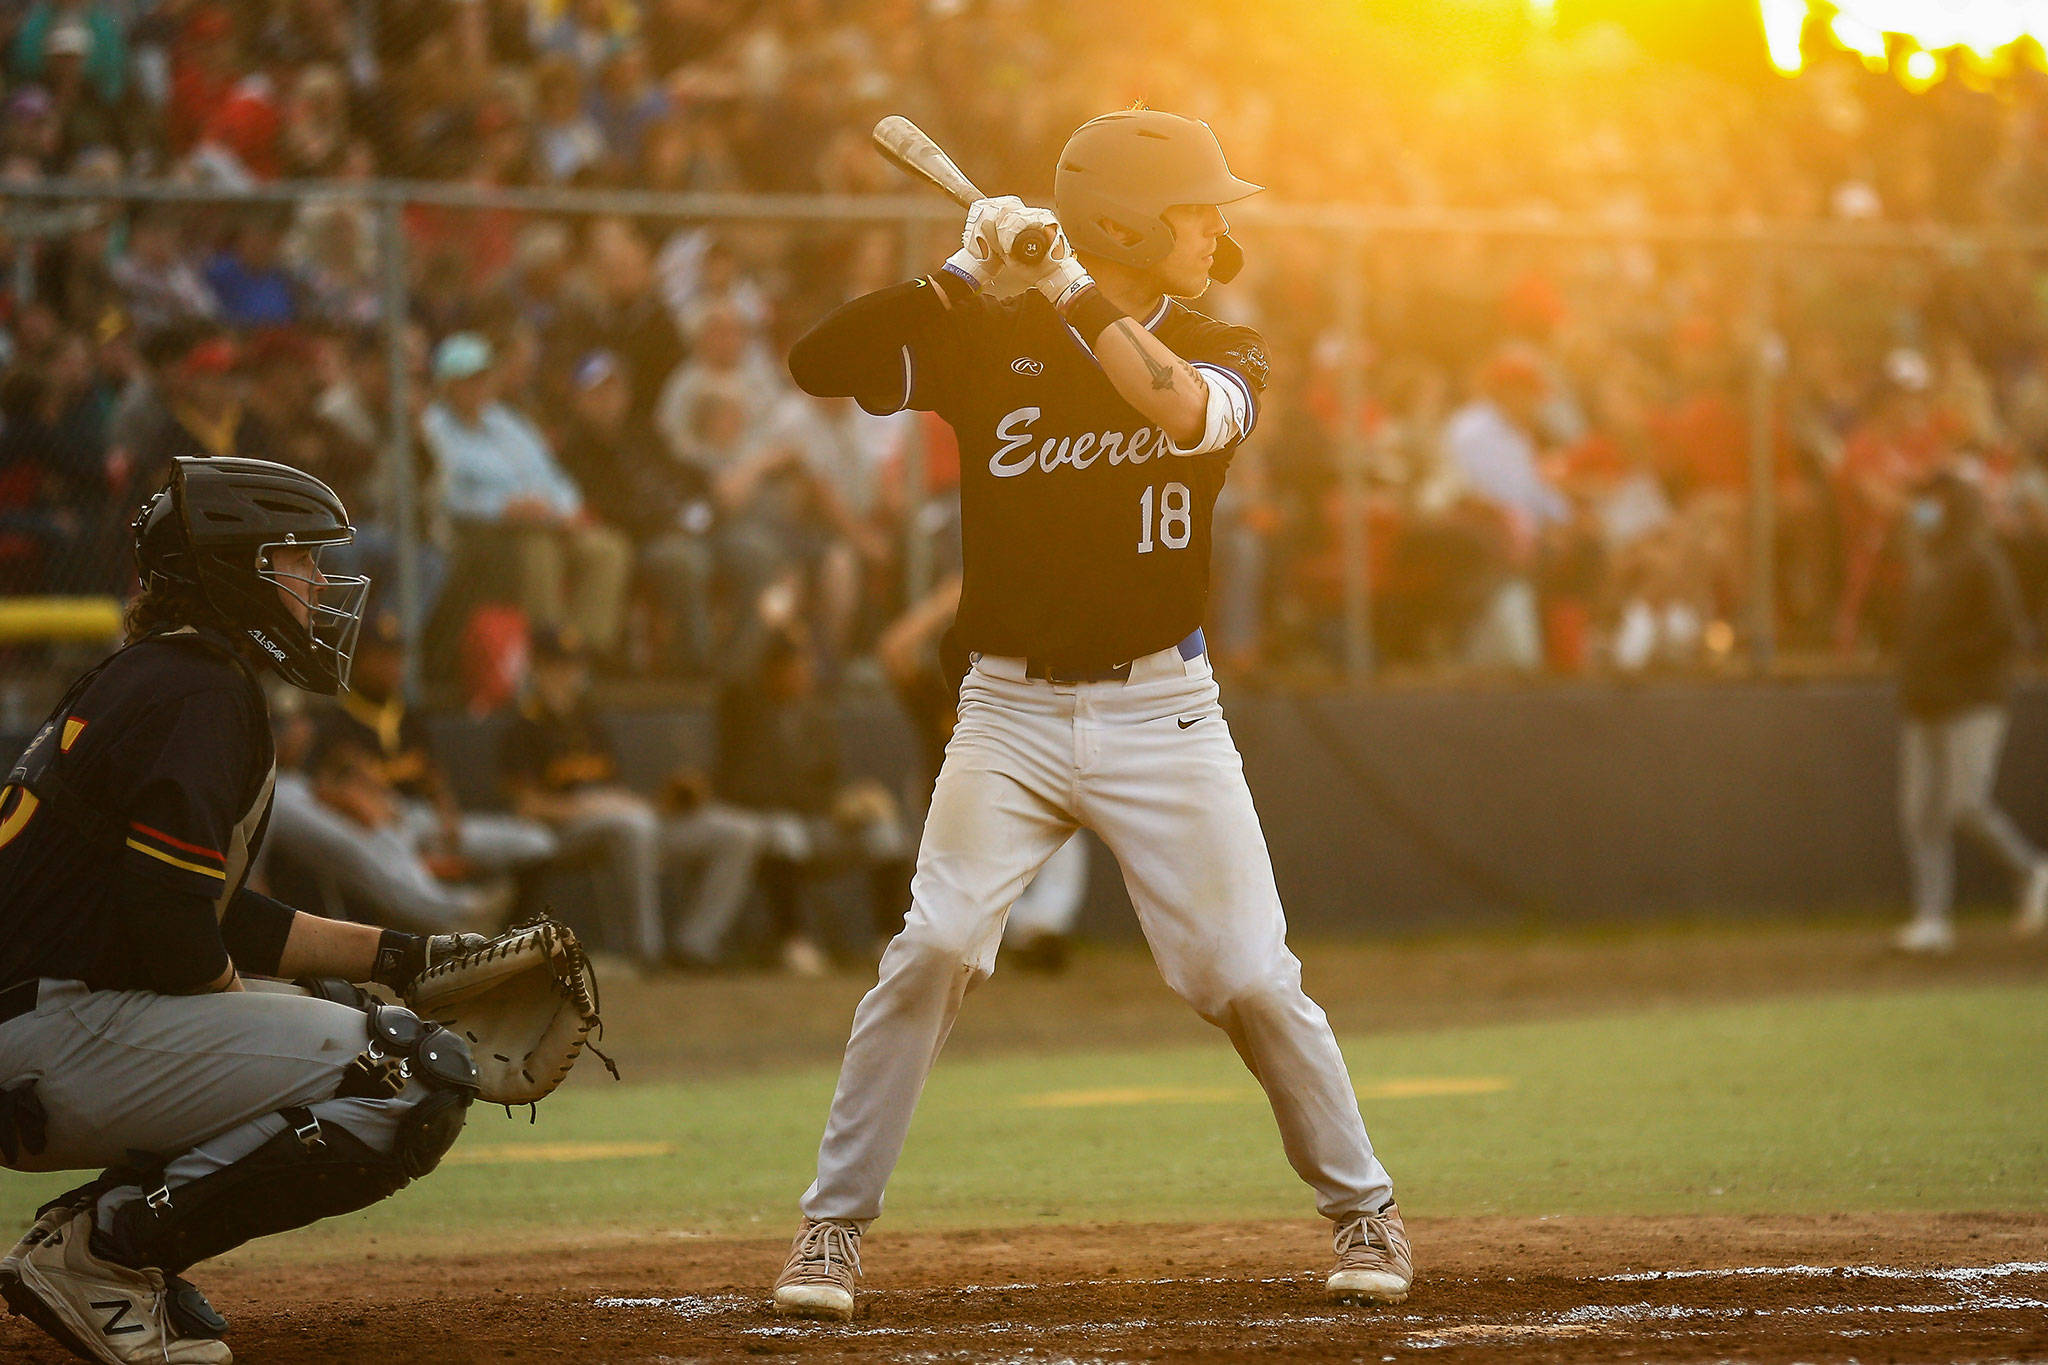 The Merchants’ Cam Keller bats during the 116th Midnight Sun Game against the Goldpanners on June 21 in Fairbanks, Alaska. (Photo by Justin Prax)